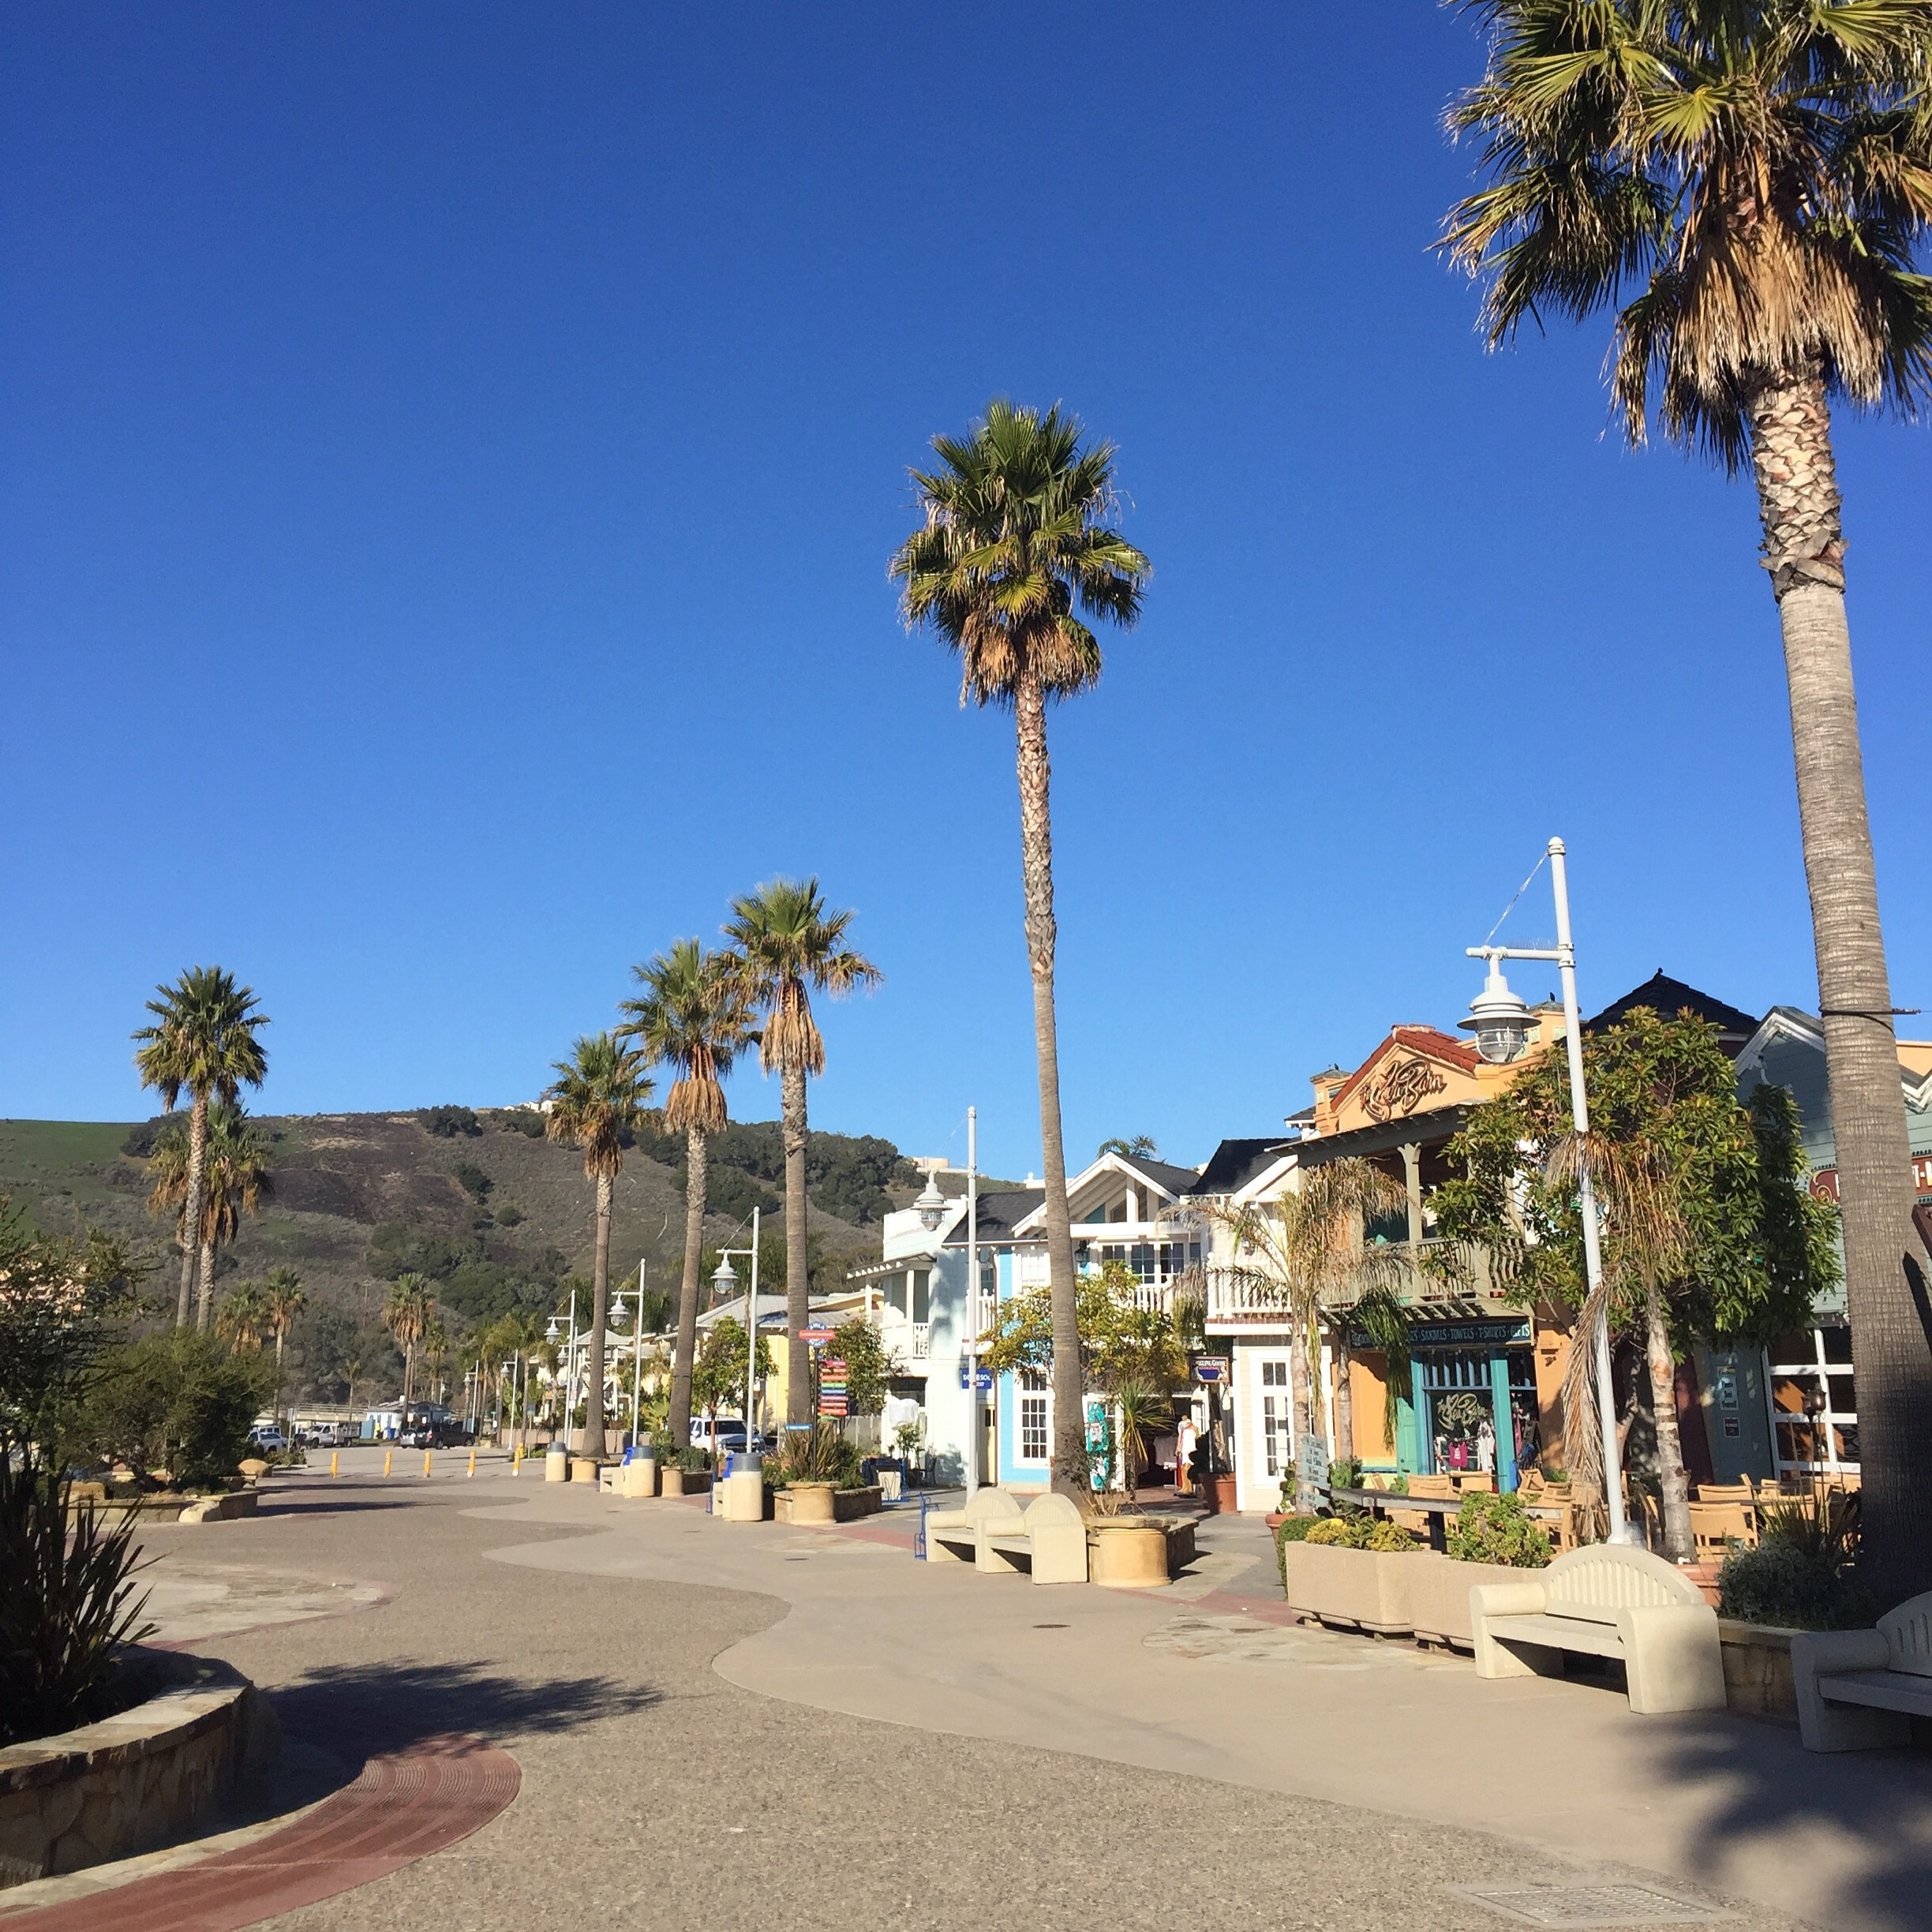 One of California's most secluded beaches: Avila Beach. Be sure to visit this quant beach community when in California's south central coast.

#beach
#beachbound
#roadtrip
#California
#lifeatexpedia
#weloveourmarkets
#AMER